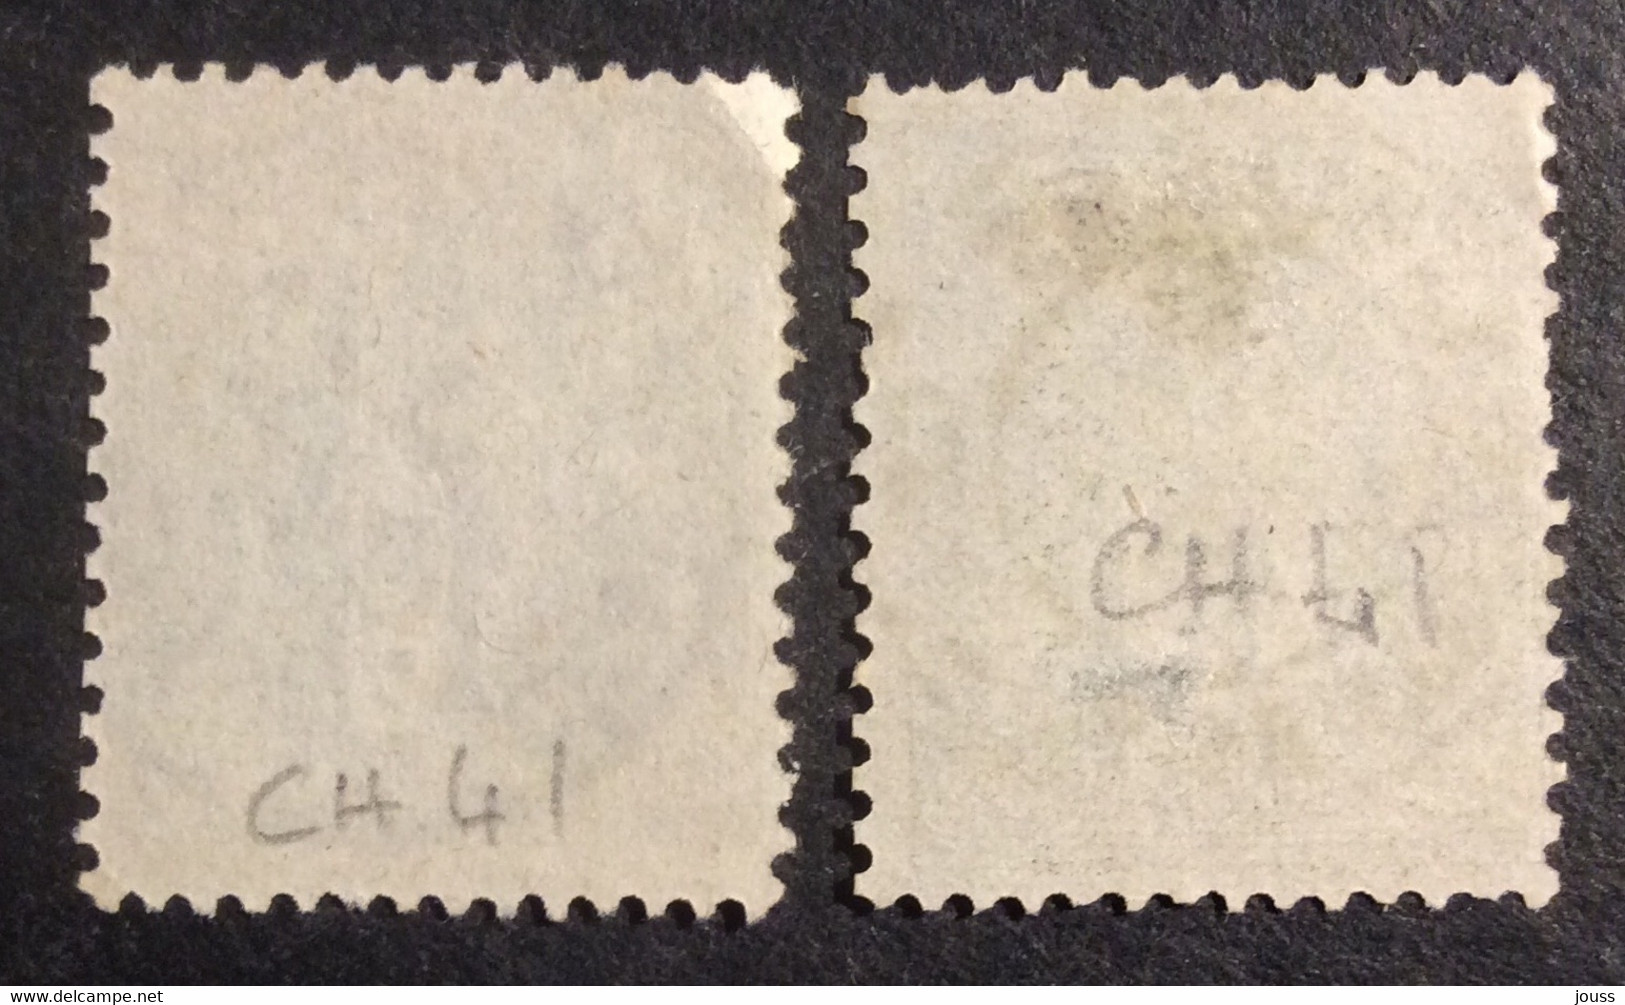 CH41 Chargements Nice + Chargement St Étienne Lot 2 Sage 1F Olive Clair 82 - 1876-1898 Sage (Type II)